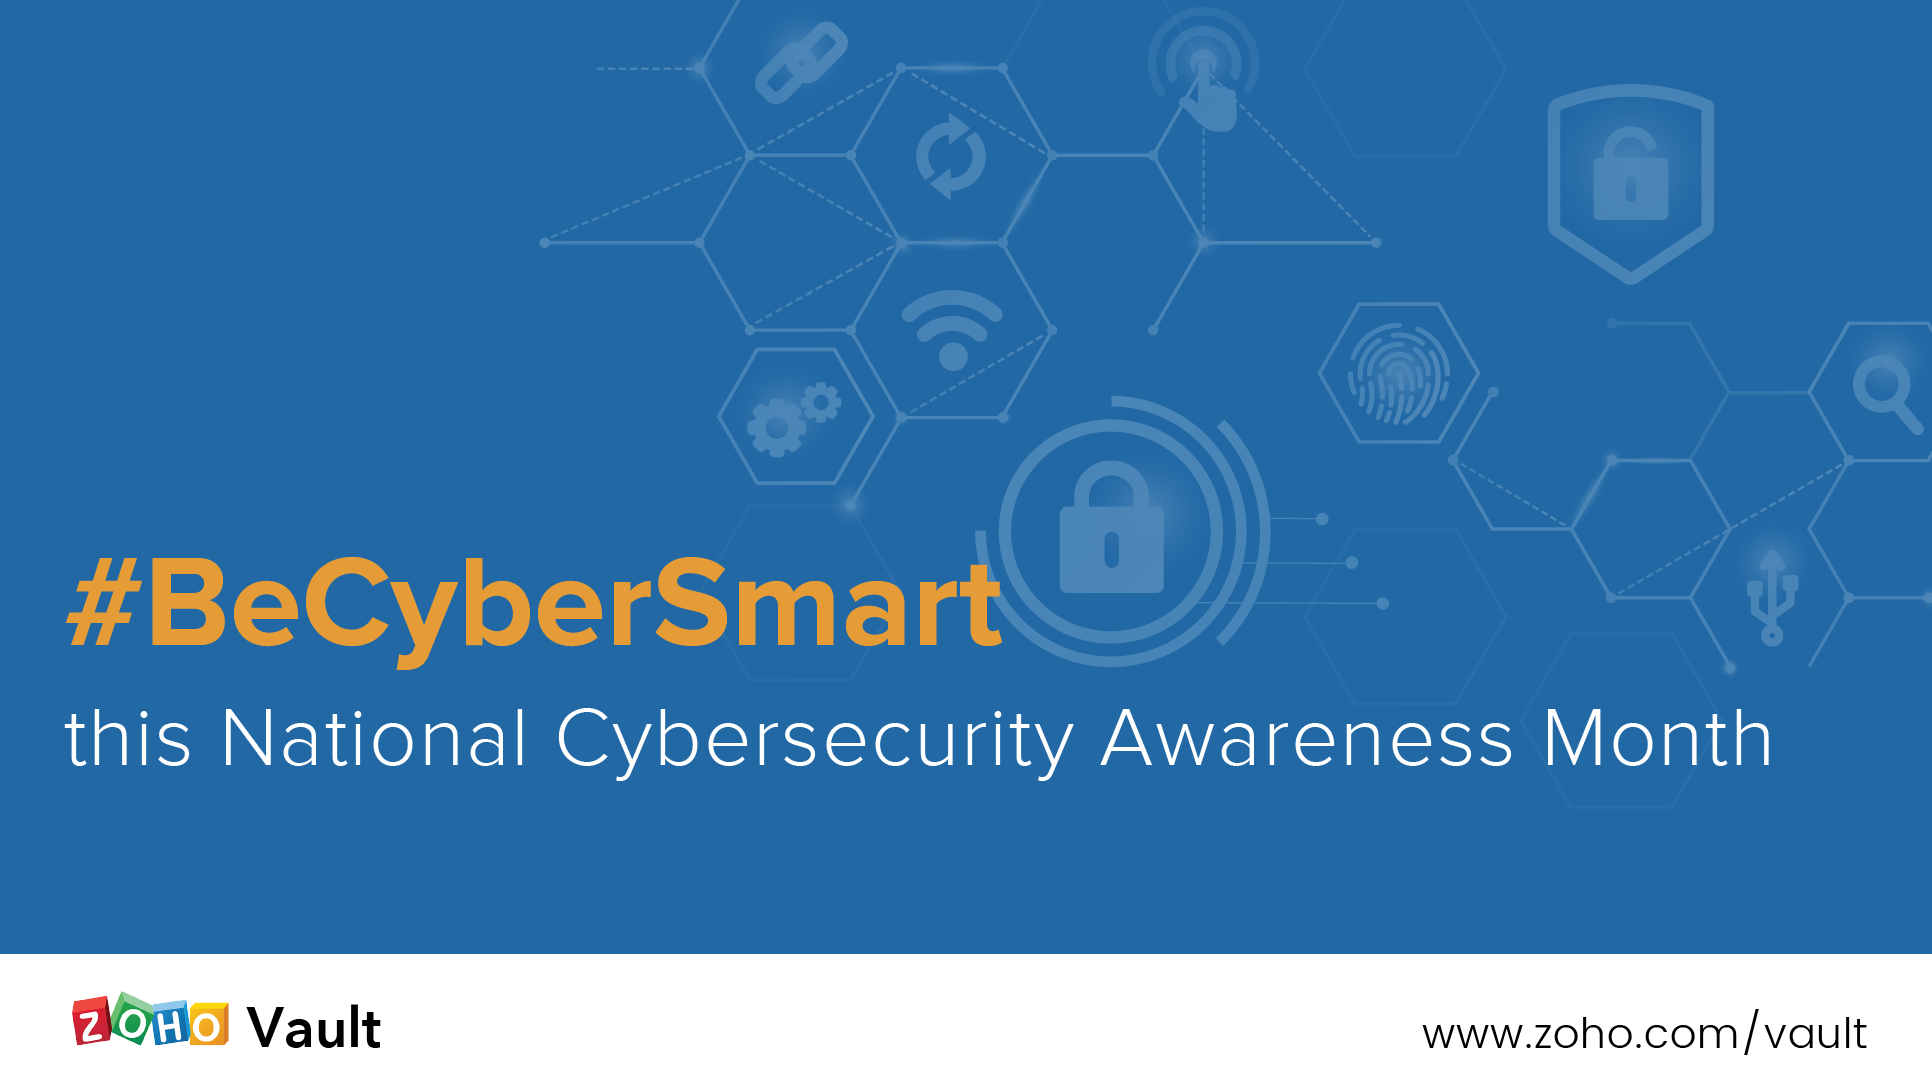 #BeCyberSmart this National Cybersecurity Awareness Month